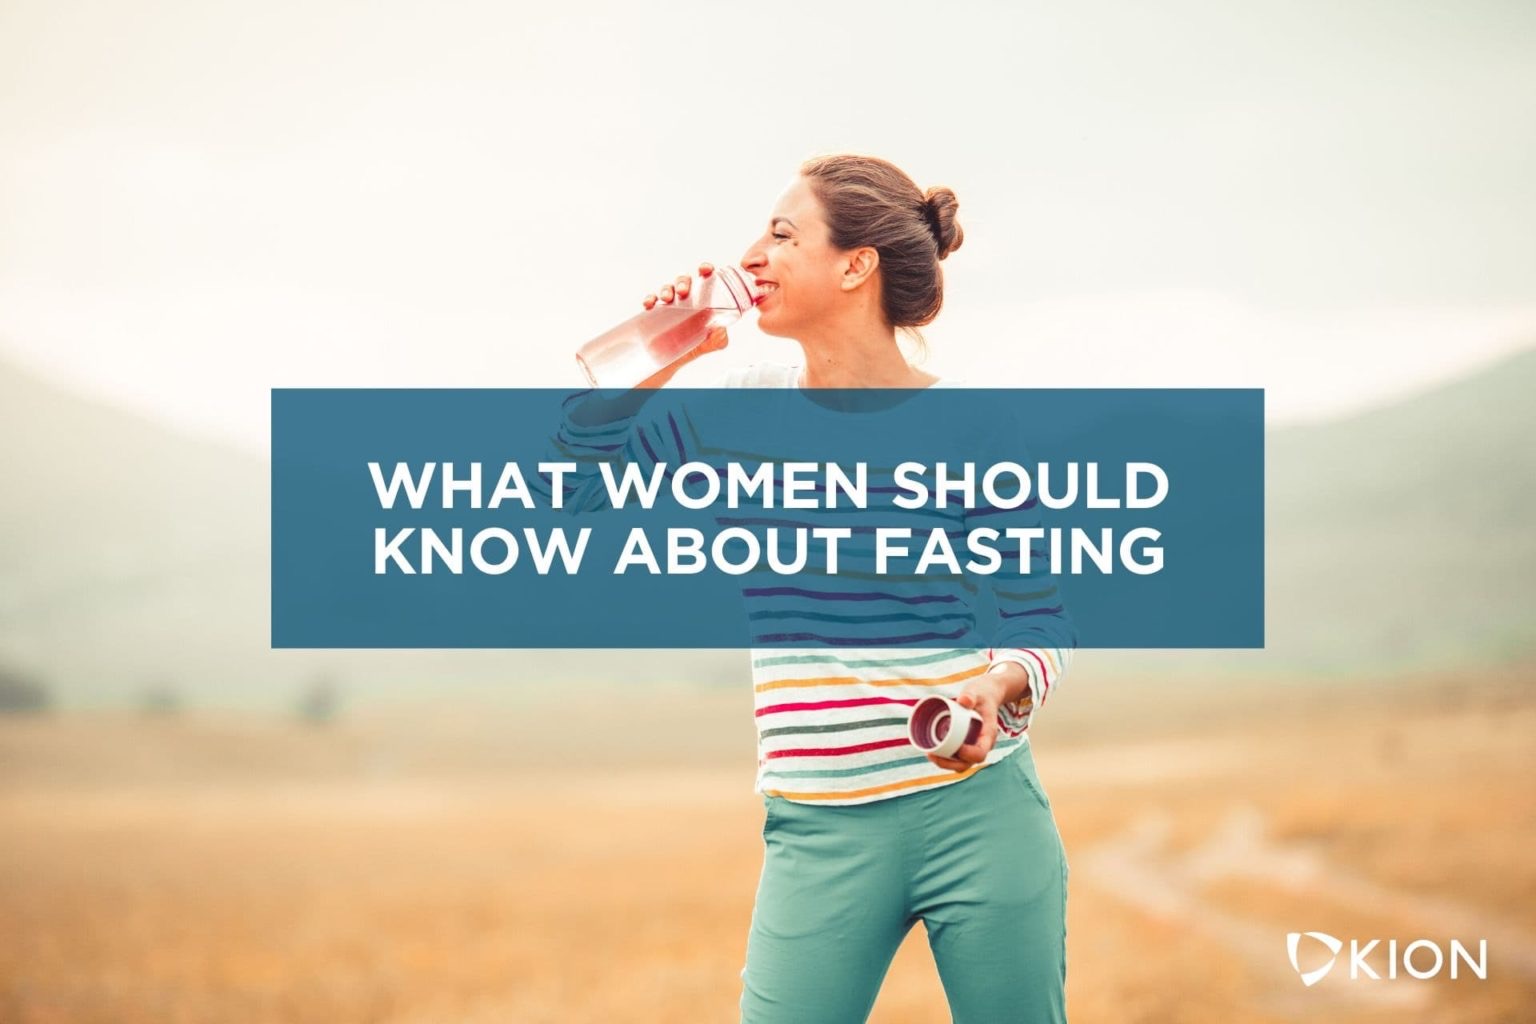 The Complete Guide To Fasting For Women Part 1: Should Females Fast?